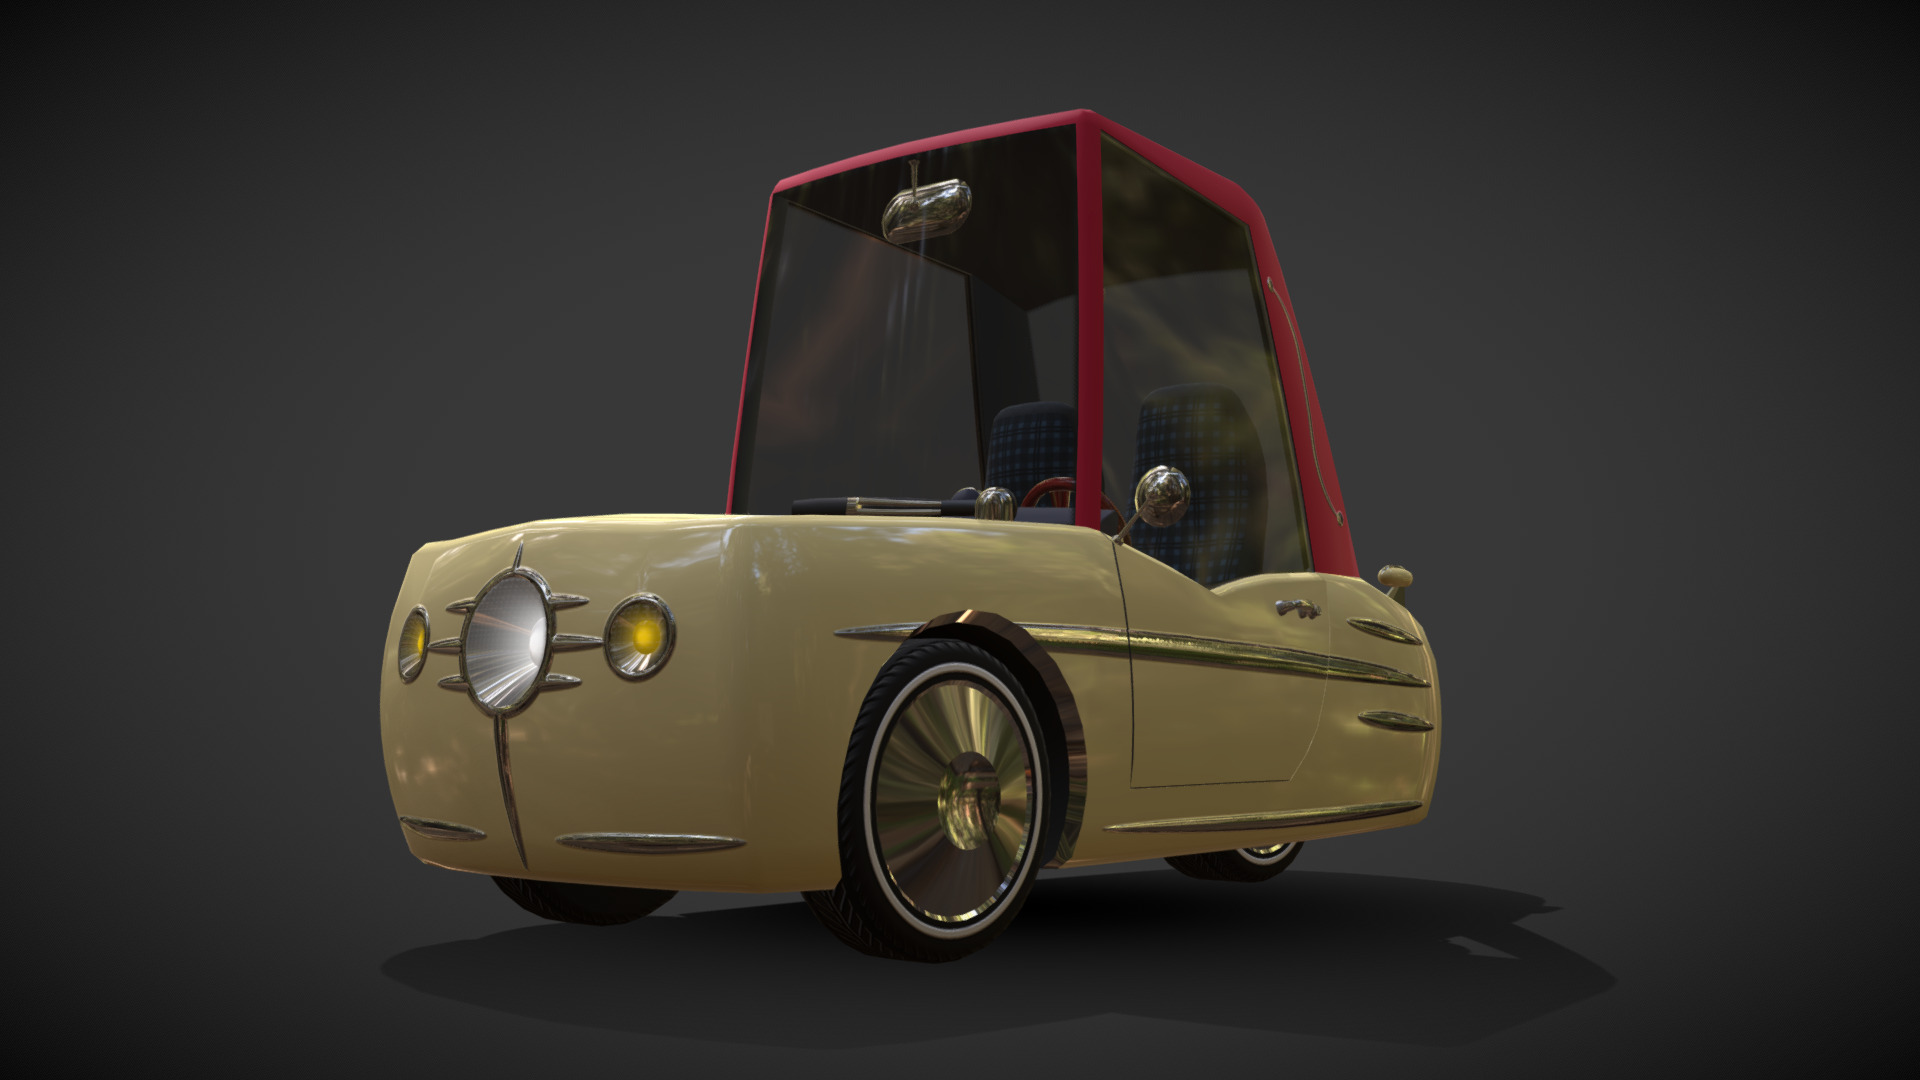 3D model Cartoon Car "Vecto" 3 Wheeler - This is a 3D model of the Cartoon Car "Vecto" 3 Wheeler. The 3D model is about a car with its doors open.